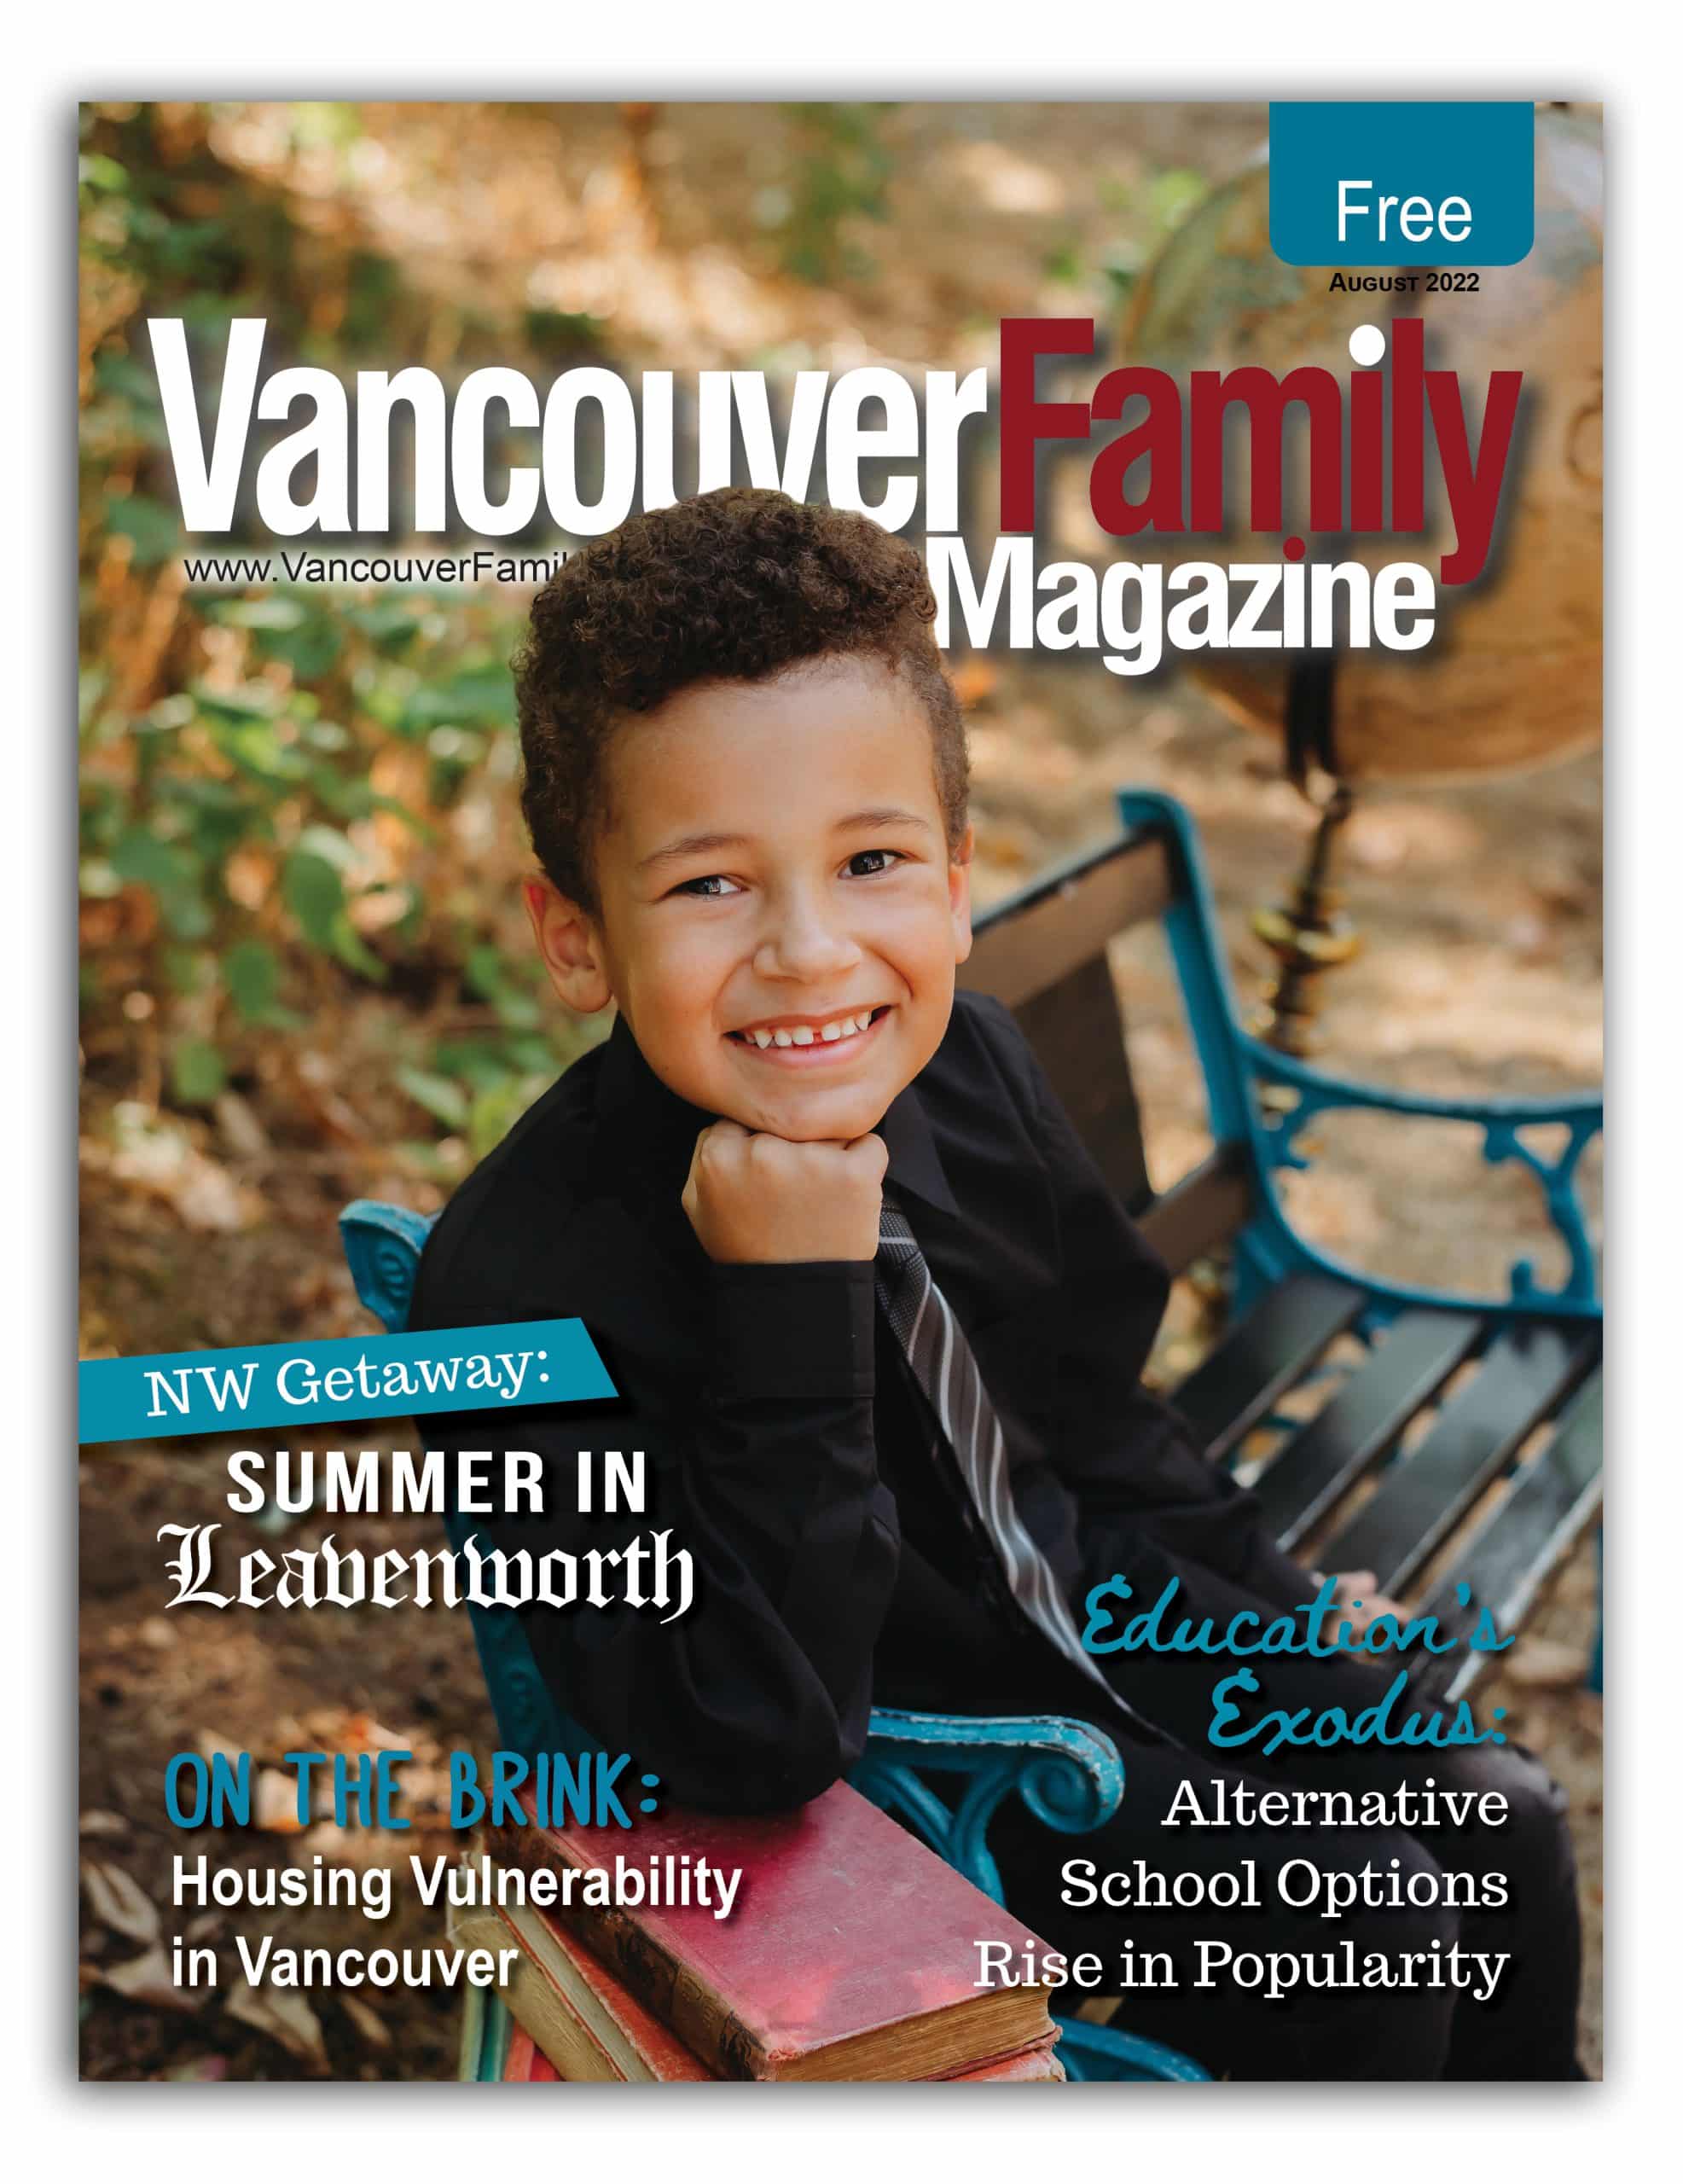 Vancouver Family Magazine August 2022 issue cover featuring a smiling boy sitting outside on a bench, with his head in his fist. His elbow rests on a pile of books.